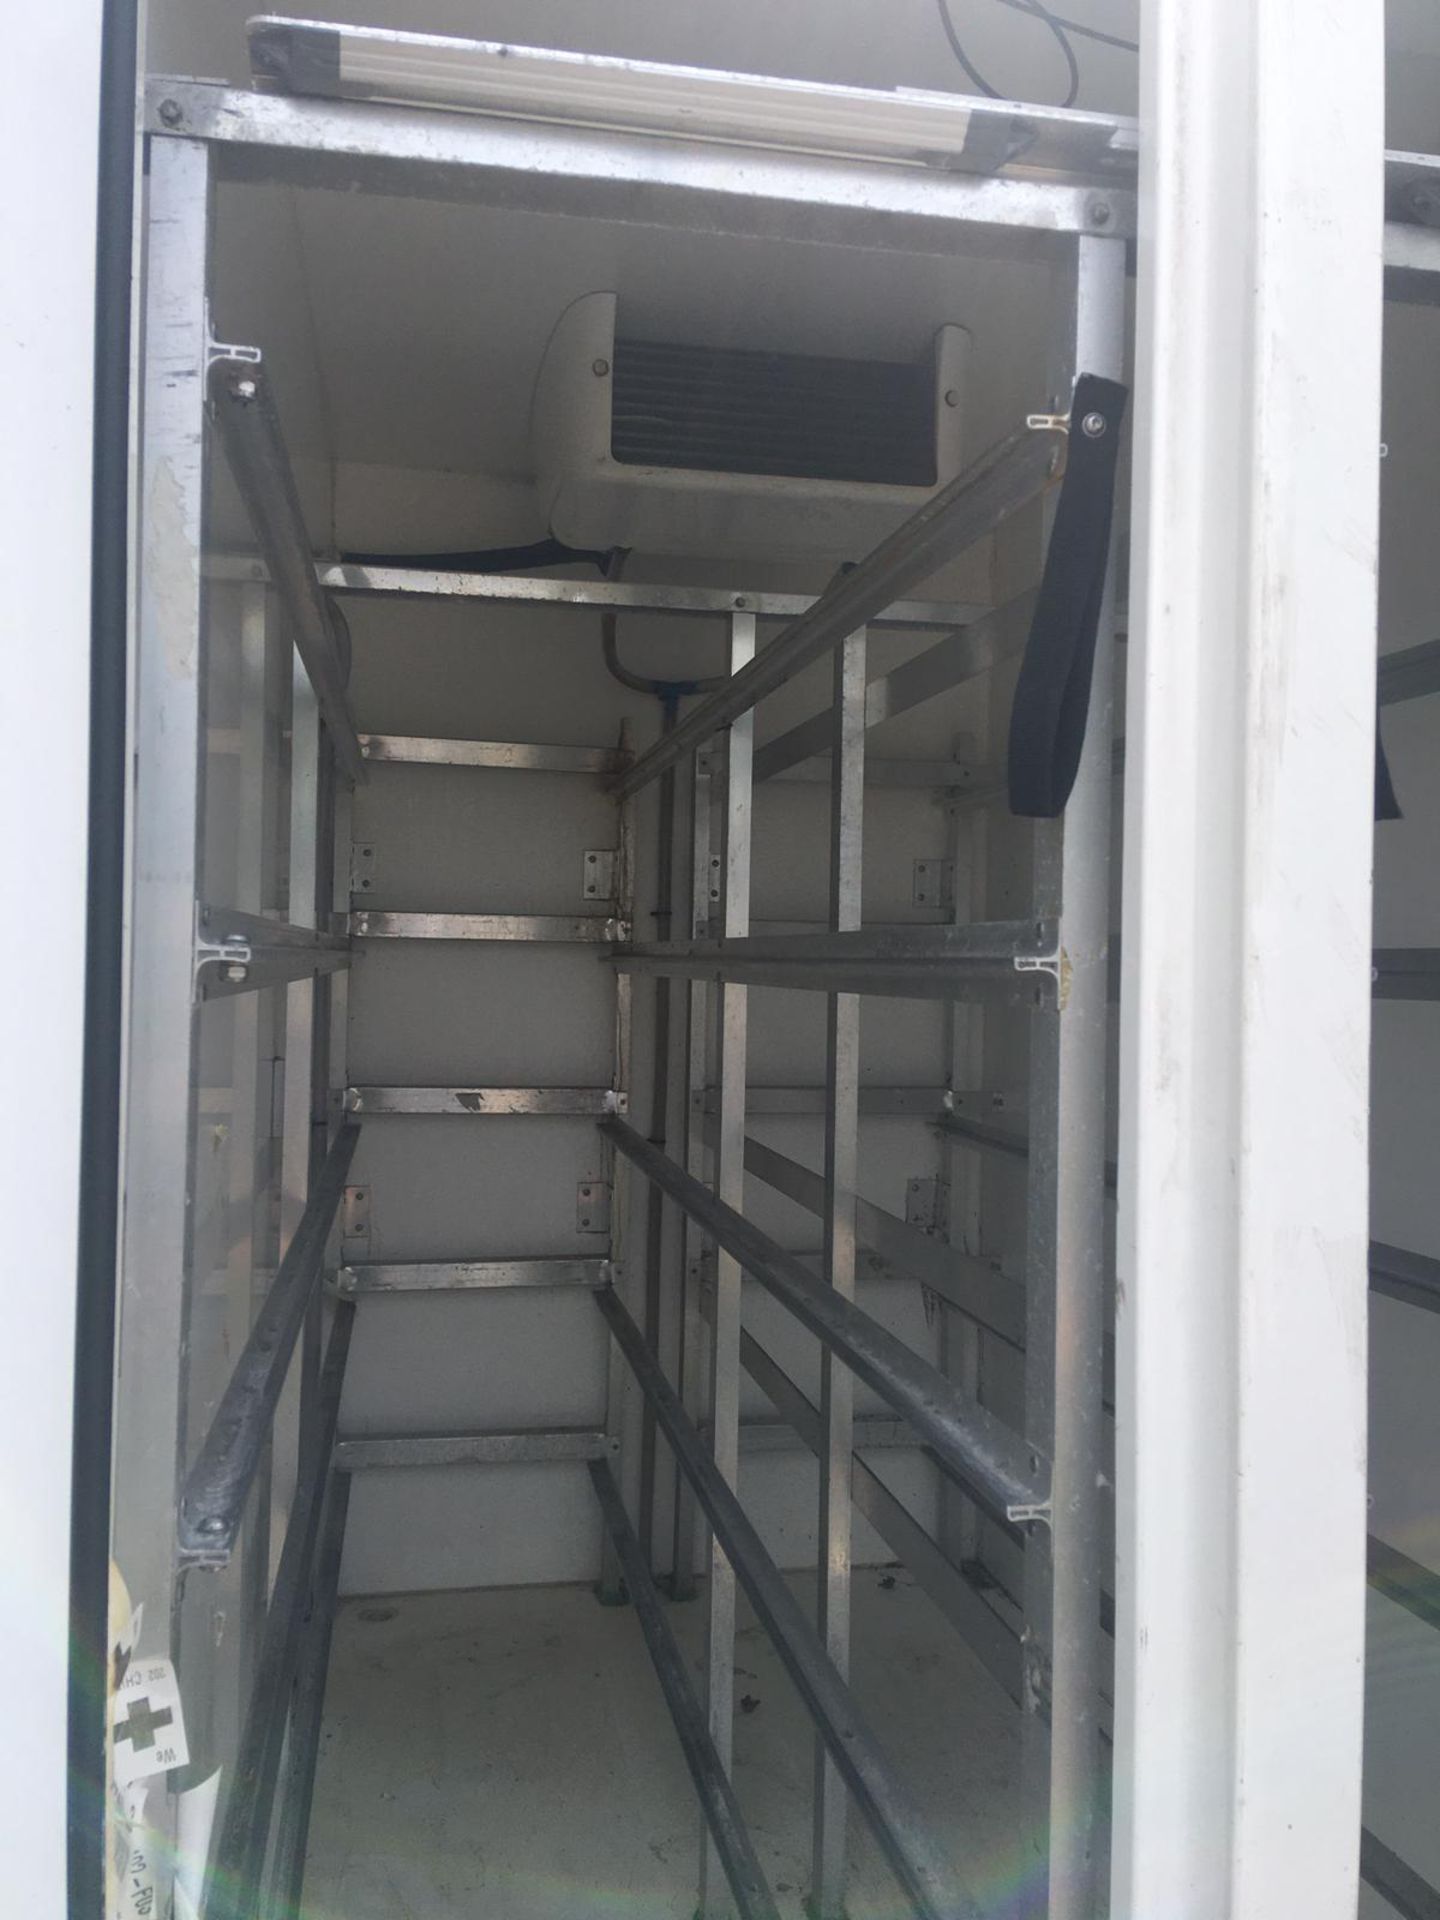 EX SUPERMARKET GAH REFRIGERATION REAR BOX UNIT, ROLLER SHUTTER DOOR, YOU'RE BIDDING FOR THE BOX ONLY - Image 8 of 10